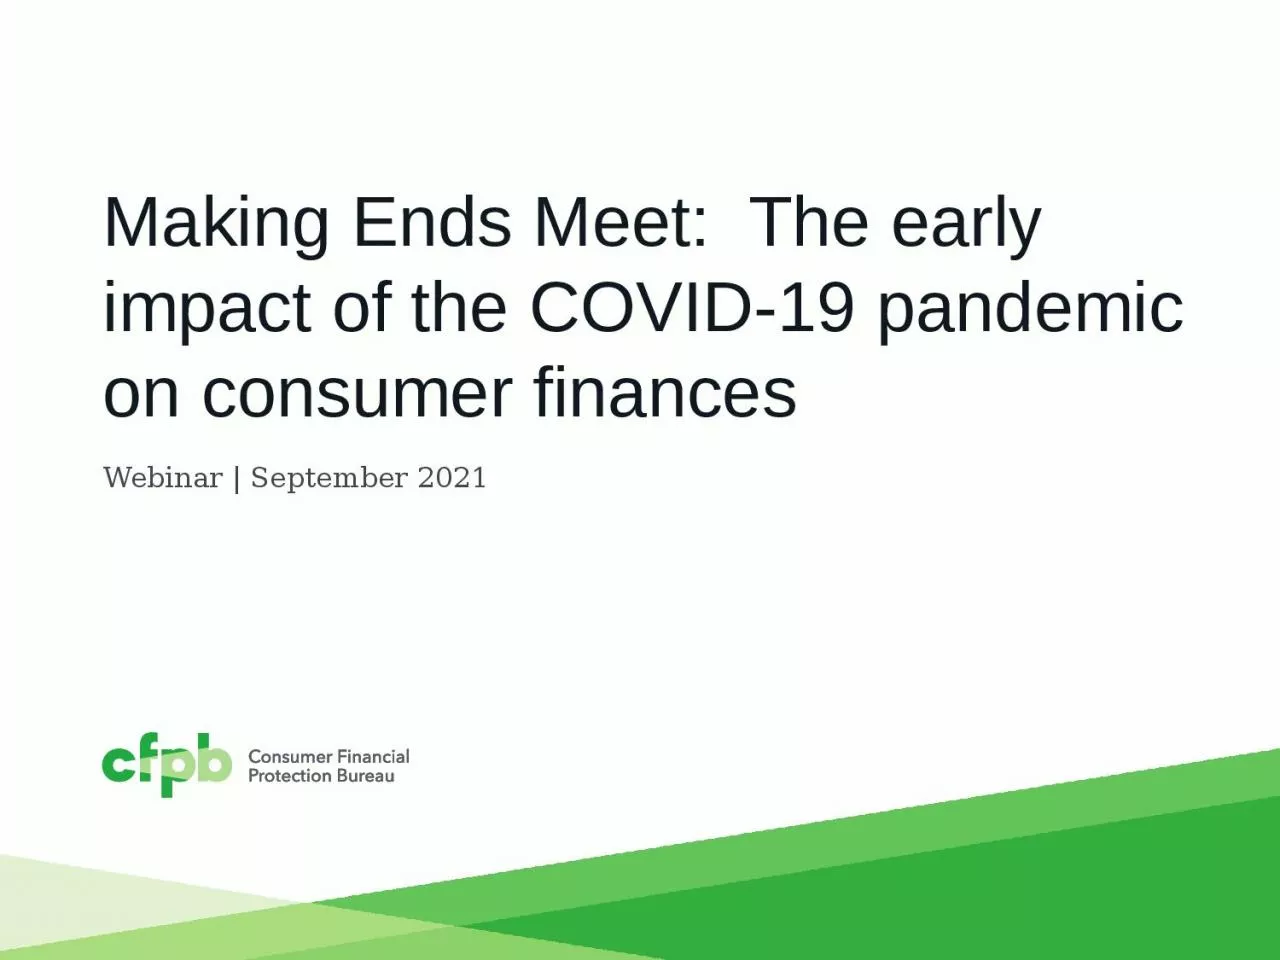 Making Ends Meet:  The early impact of the COVID-19 pandemic on consumer finances